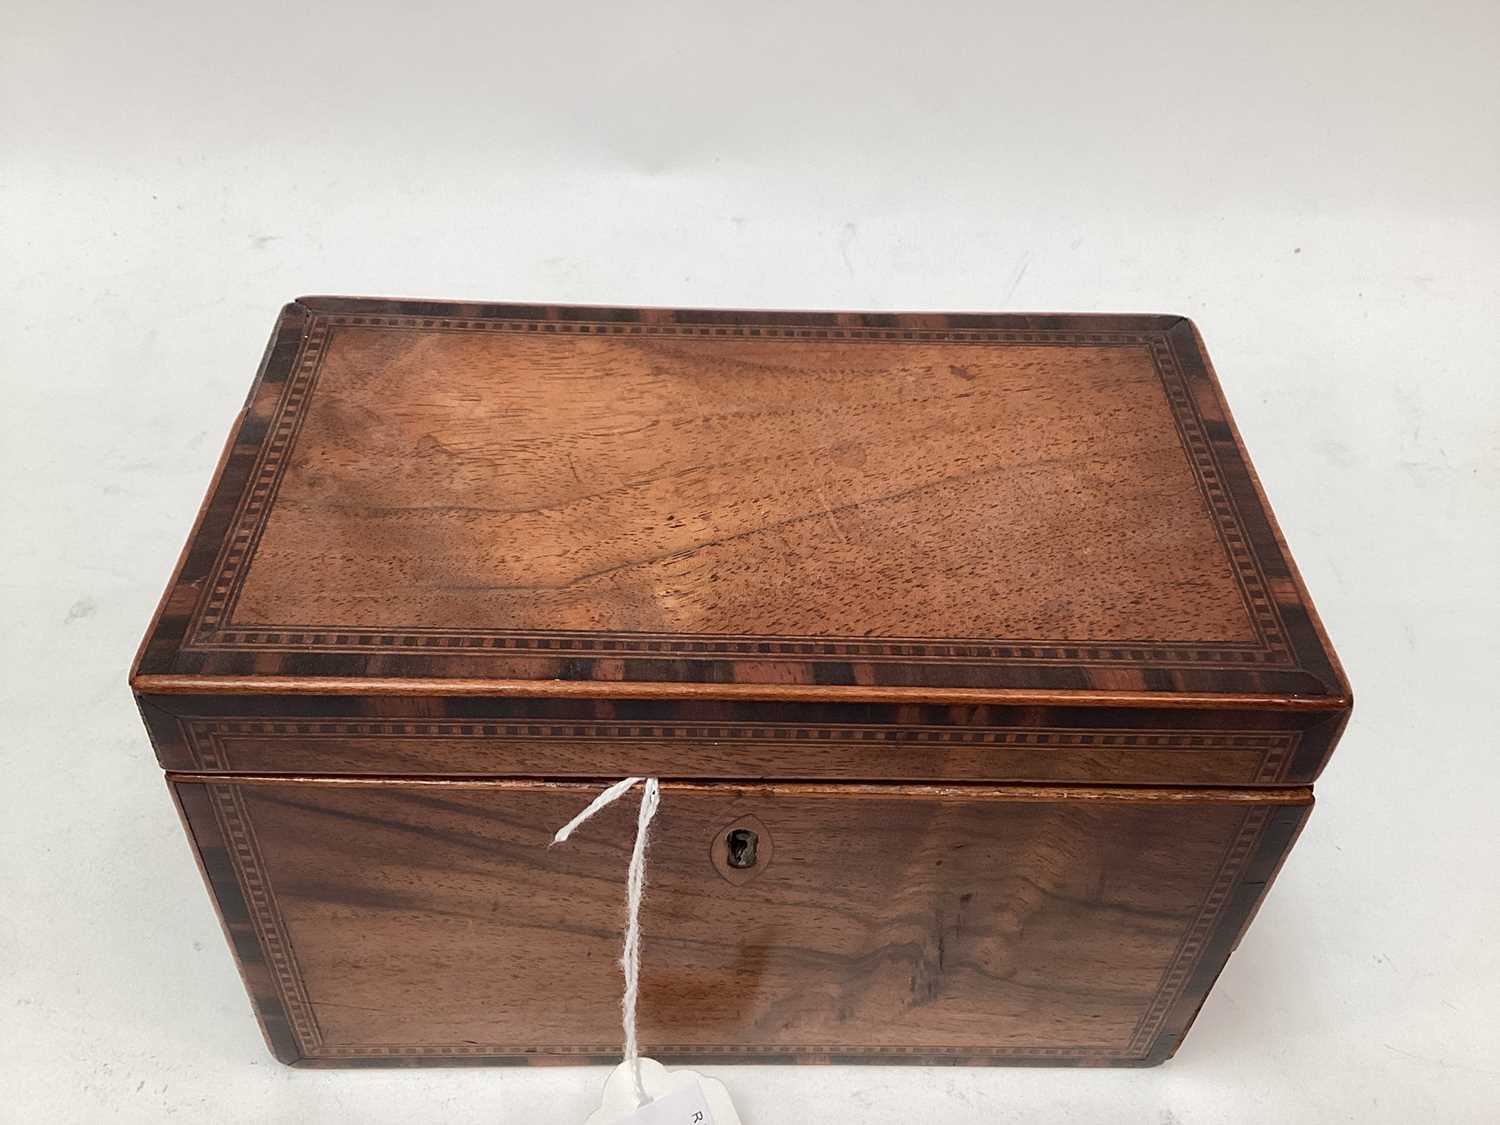 Victorian walnut tea caddy with banded decoration to edges, two-division interior, 18cm wide - Image 3 of 8